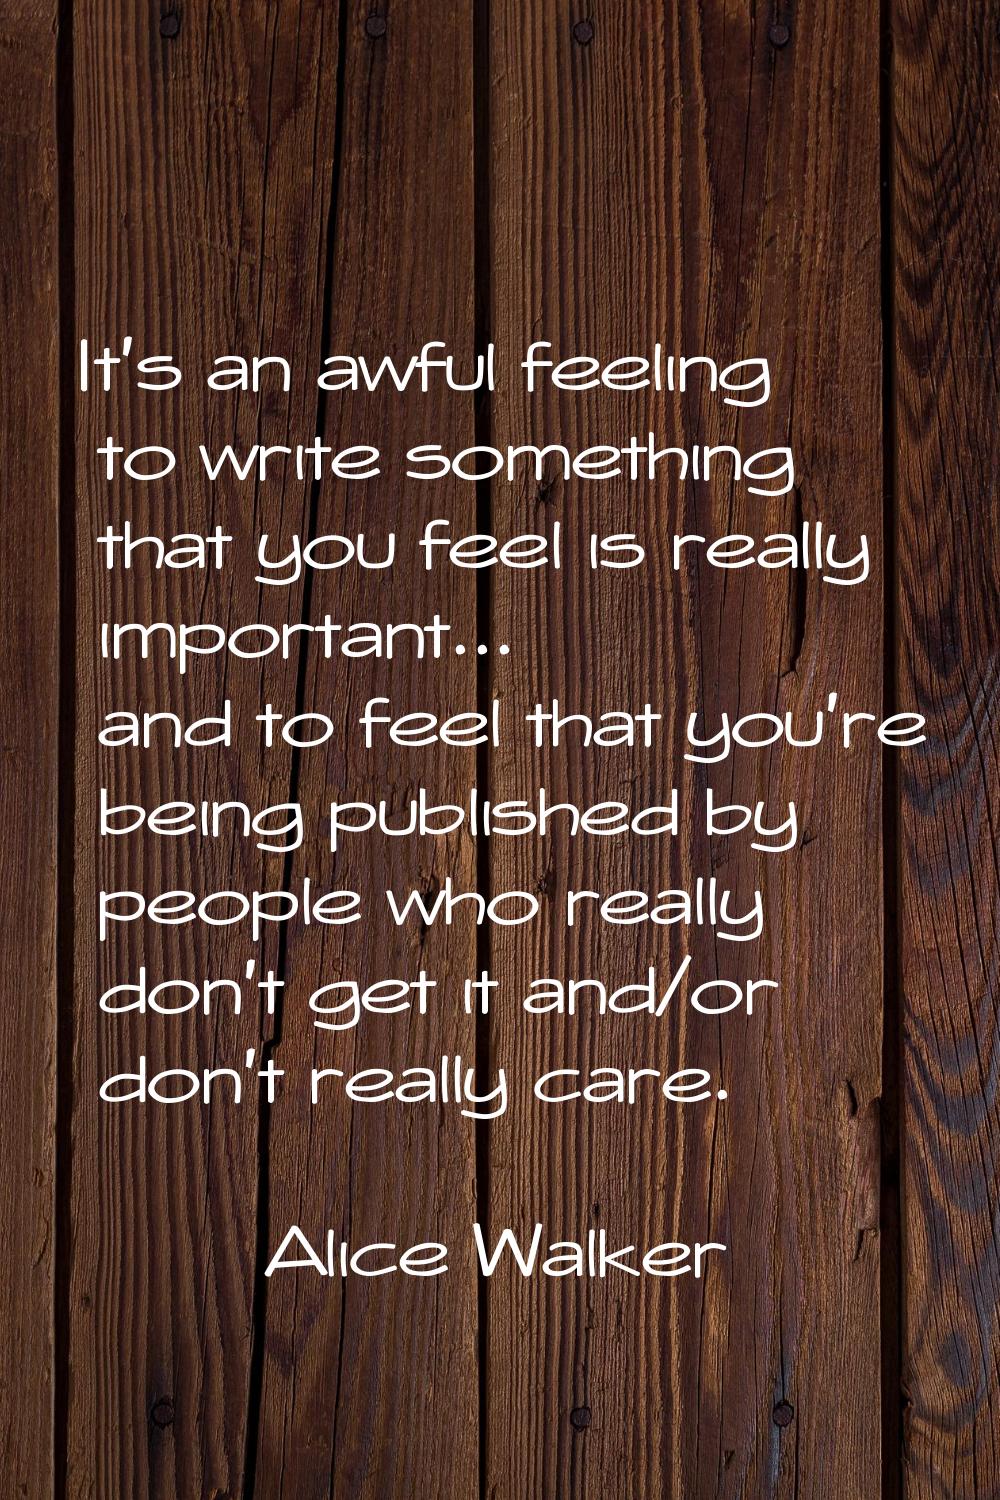 It's an awful feeling to write something that you feel is really important... and to feel that you'